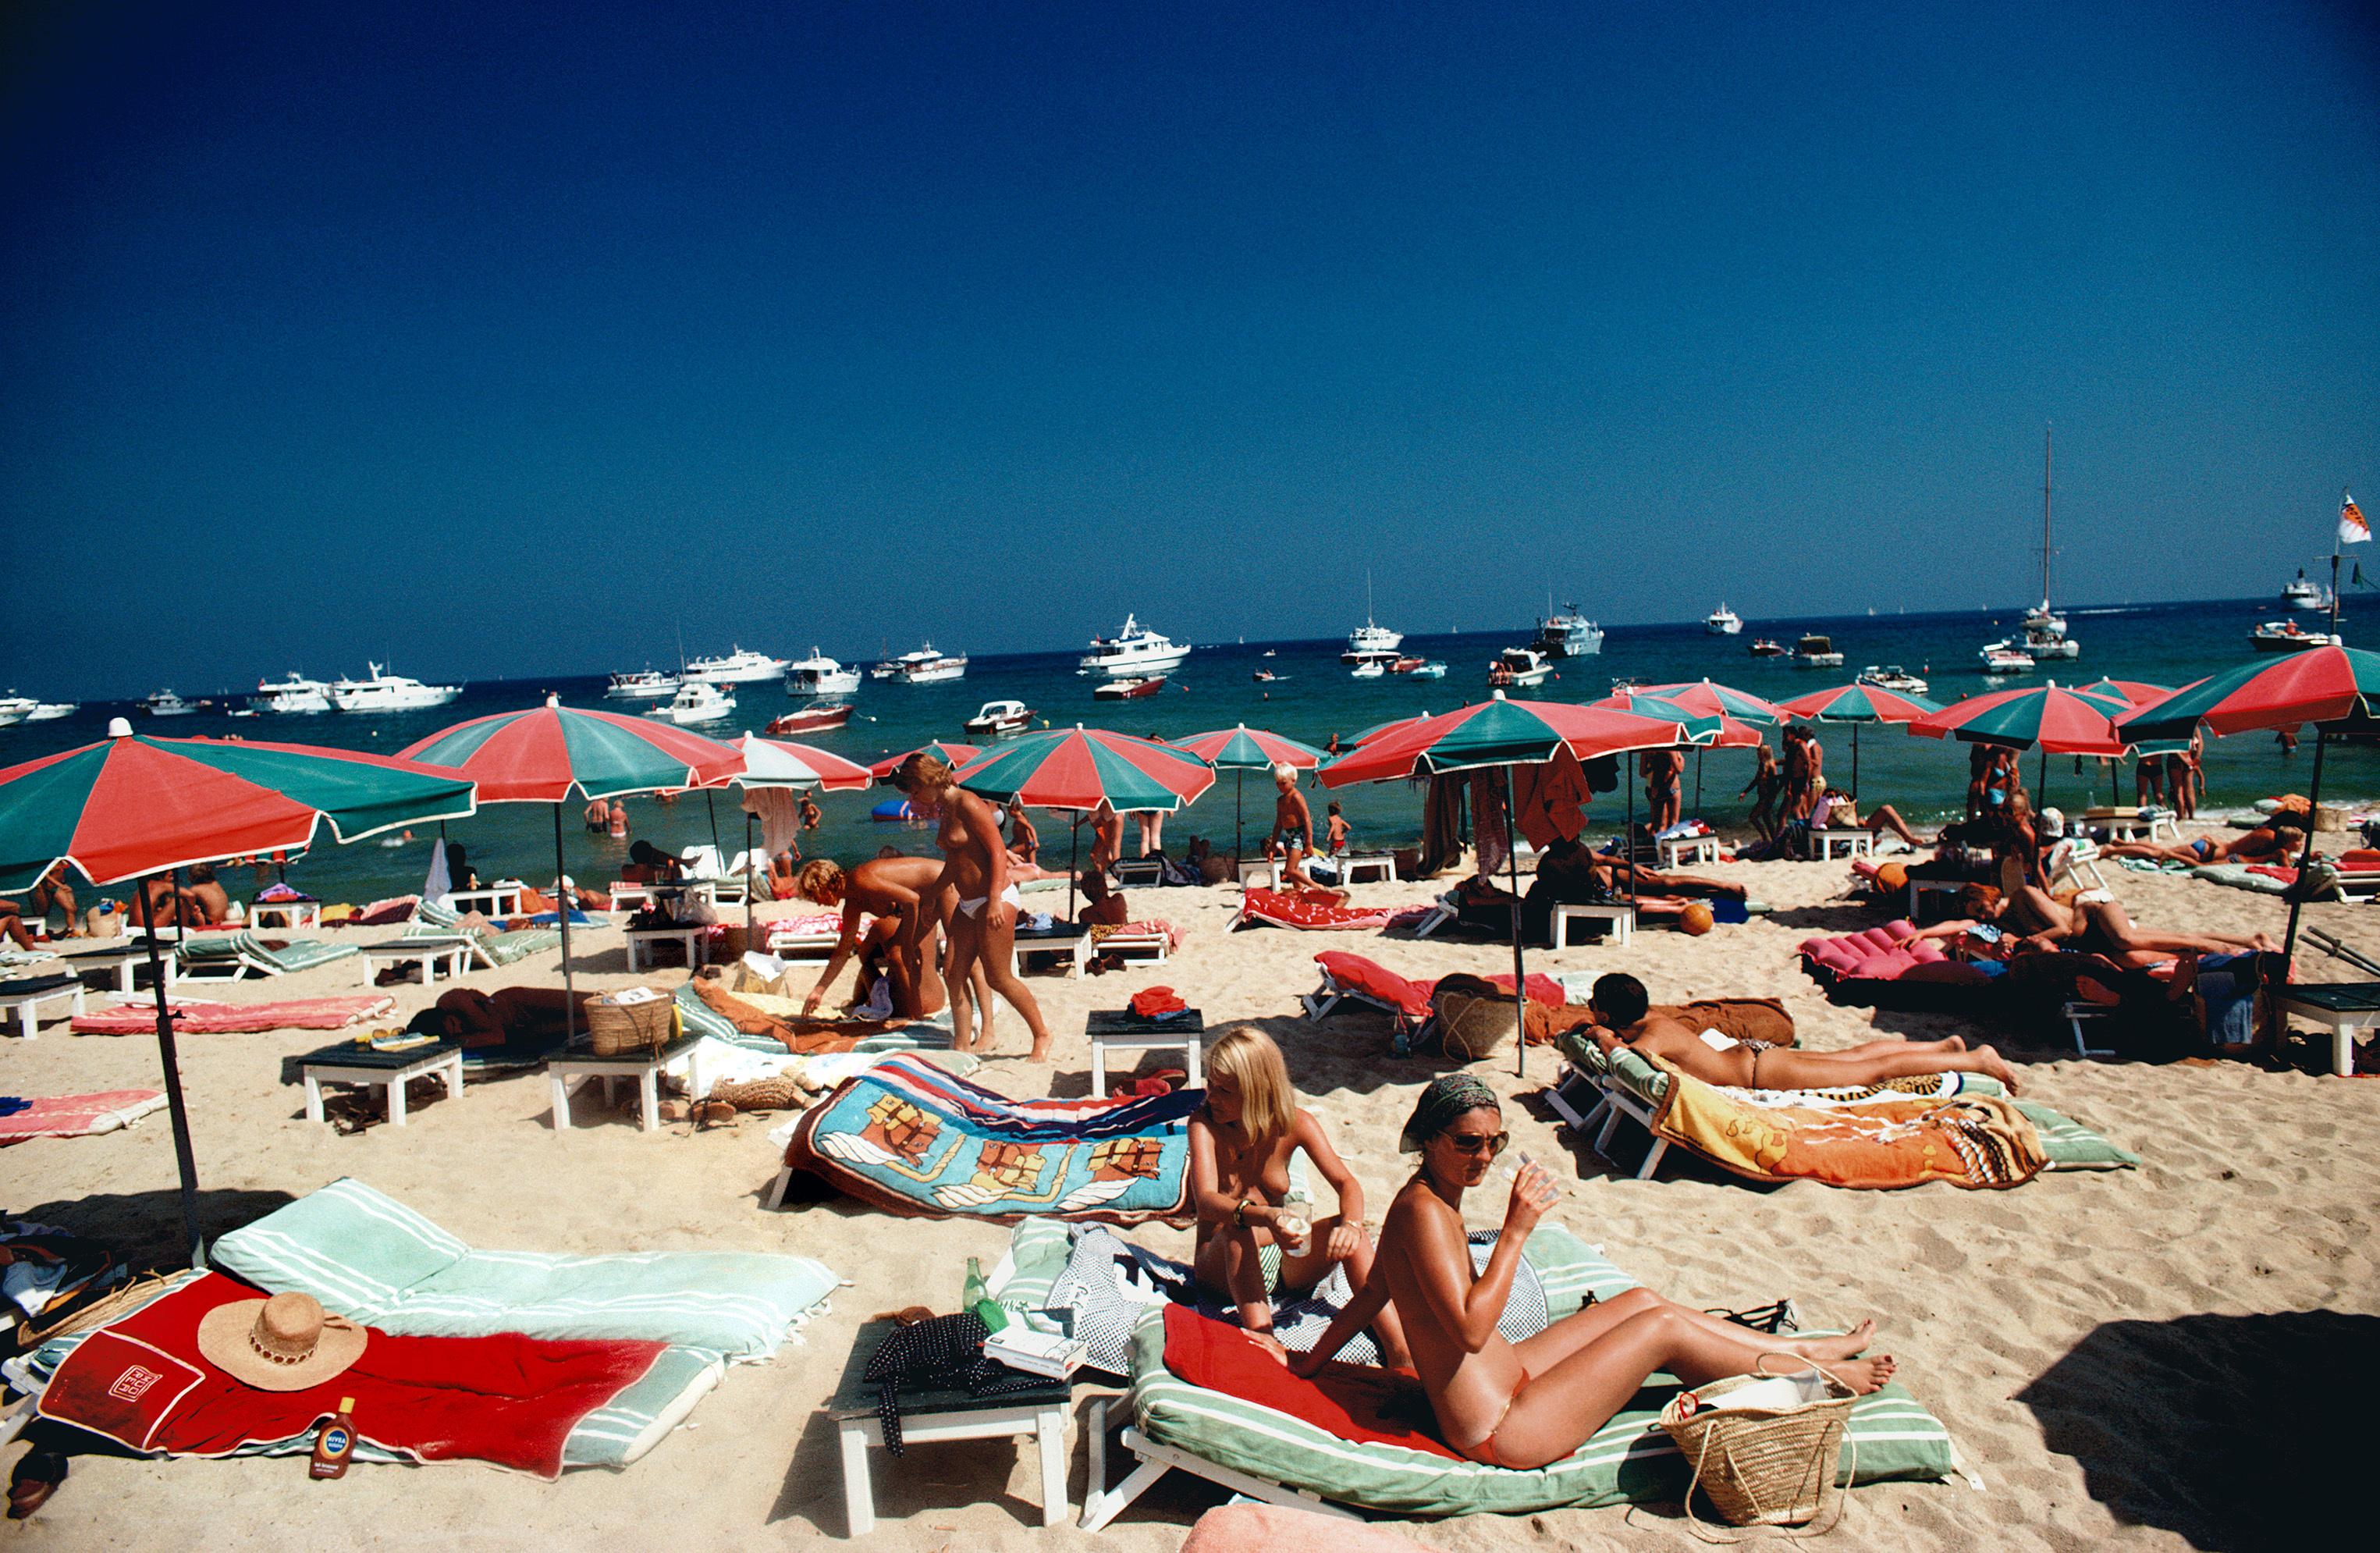 Beach At Saint Tropez

1977

Sunbathers on the beach at St. Tropez, France, 1977.

By Slim Aarons

30x20” / 76x51 cm - paper size 
C-Type Print
unframed 
Estate Stamped Edition 
Edition of 150 in total 
Numbered in ink and stamped with a blind